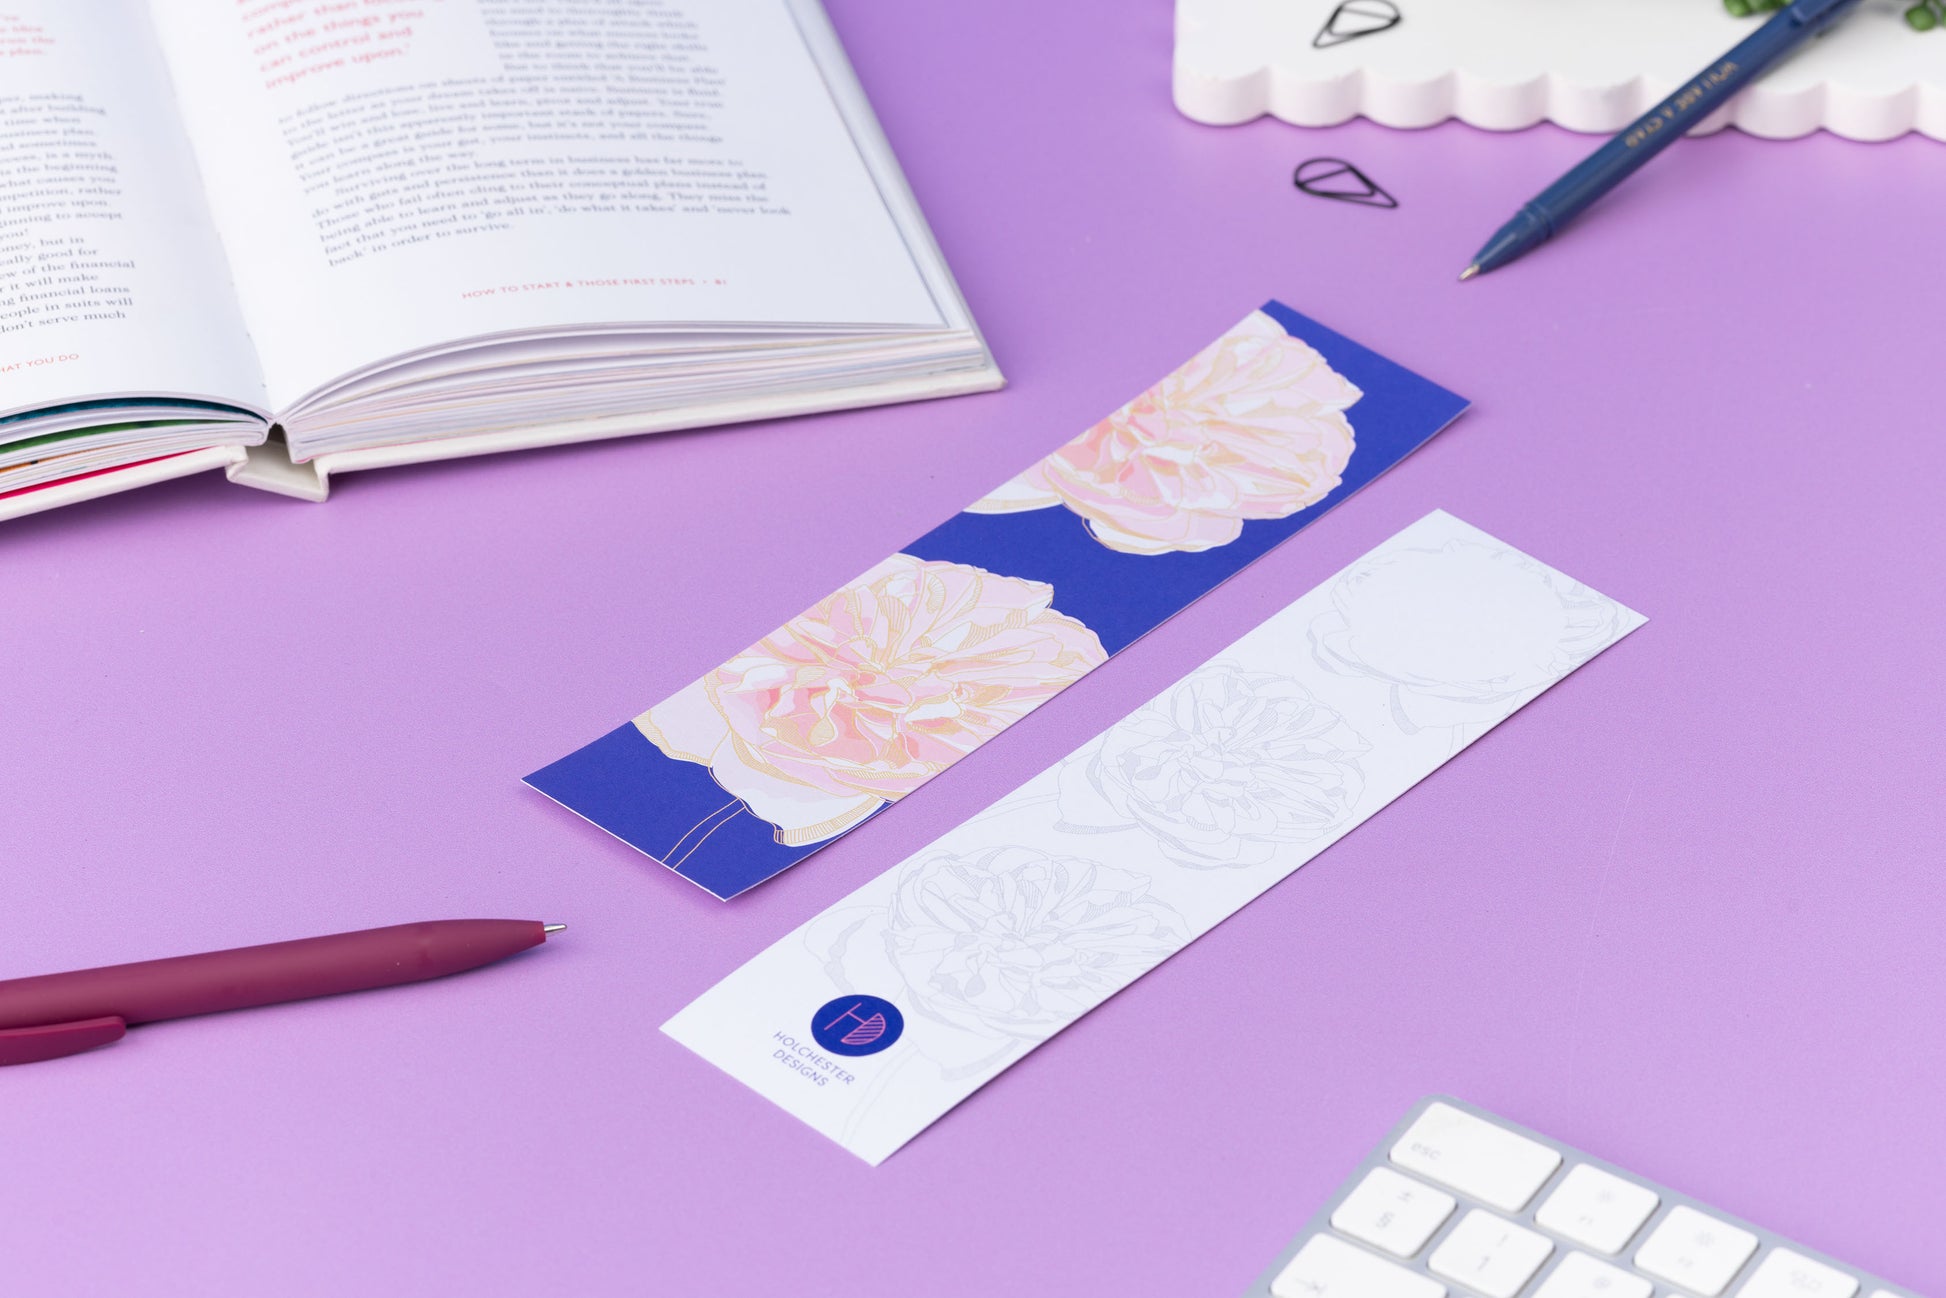 Two bookmarks, showing each side of the Spring Forward Bookmark.  One side has a blue background with pink dhalia illustrations and golden ellow outlines, the other side is white with light grey outlines of the dahlia.  They are on a lilac desk with an open book, pens and keyboard around them.